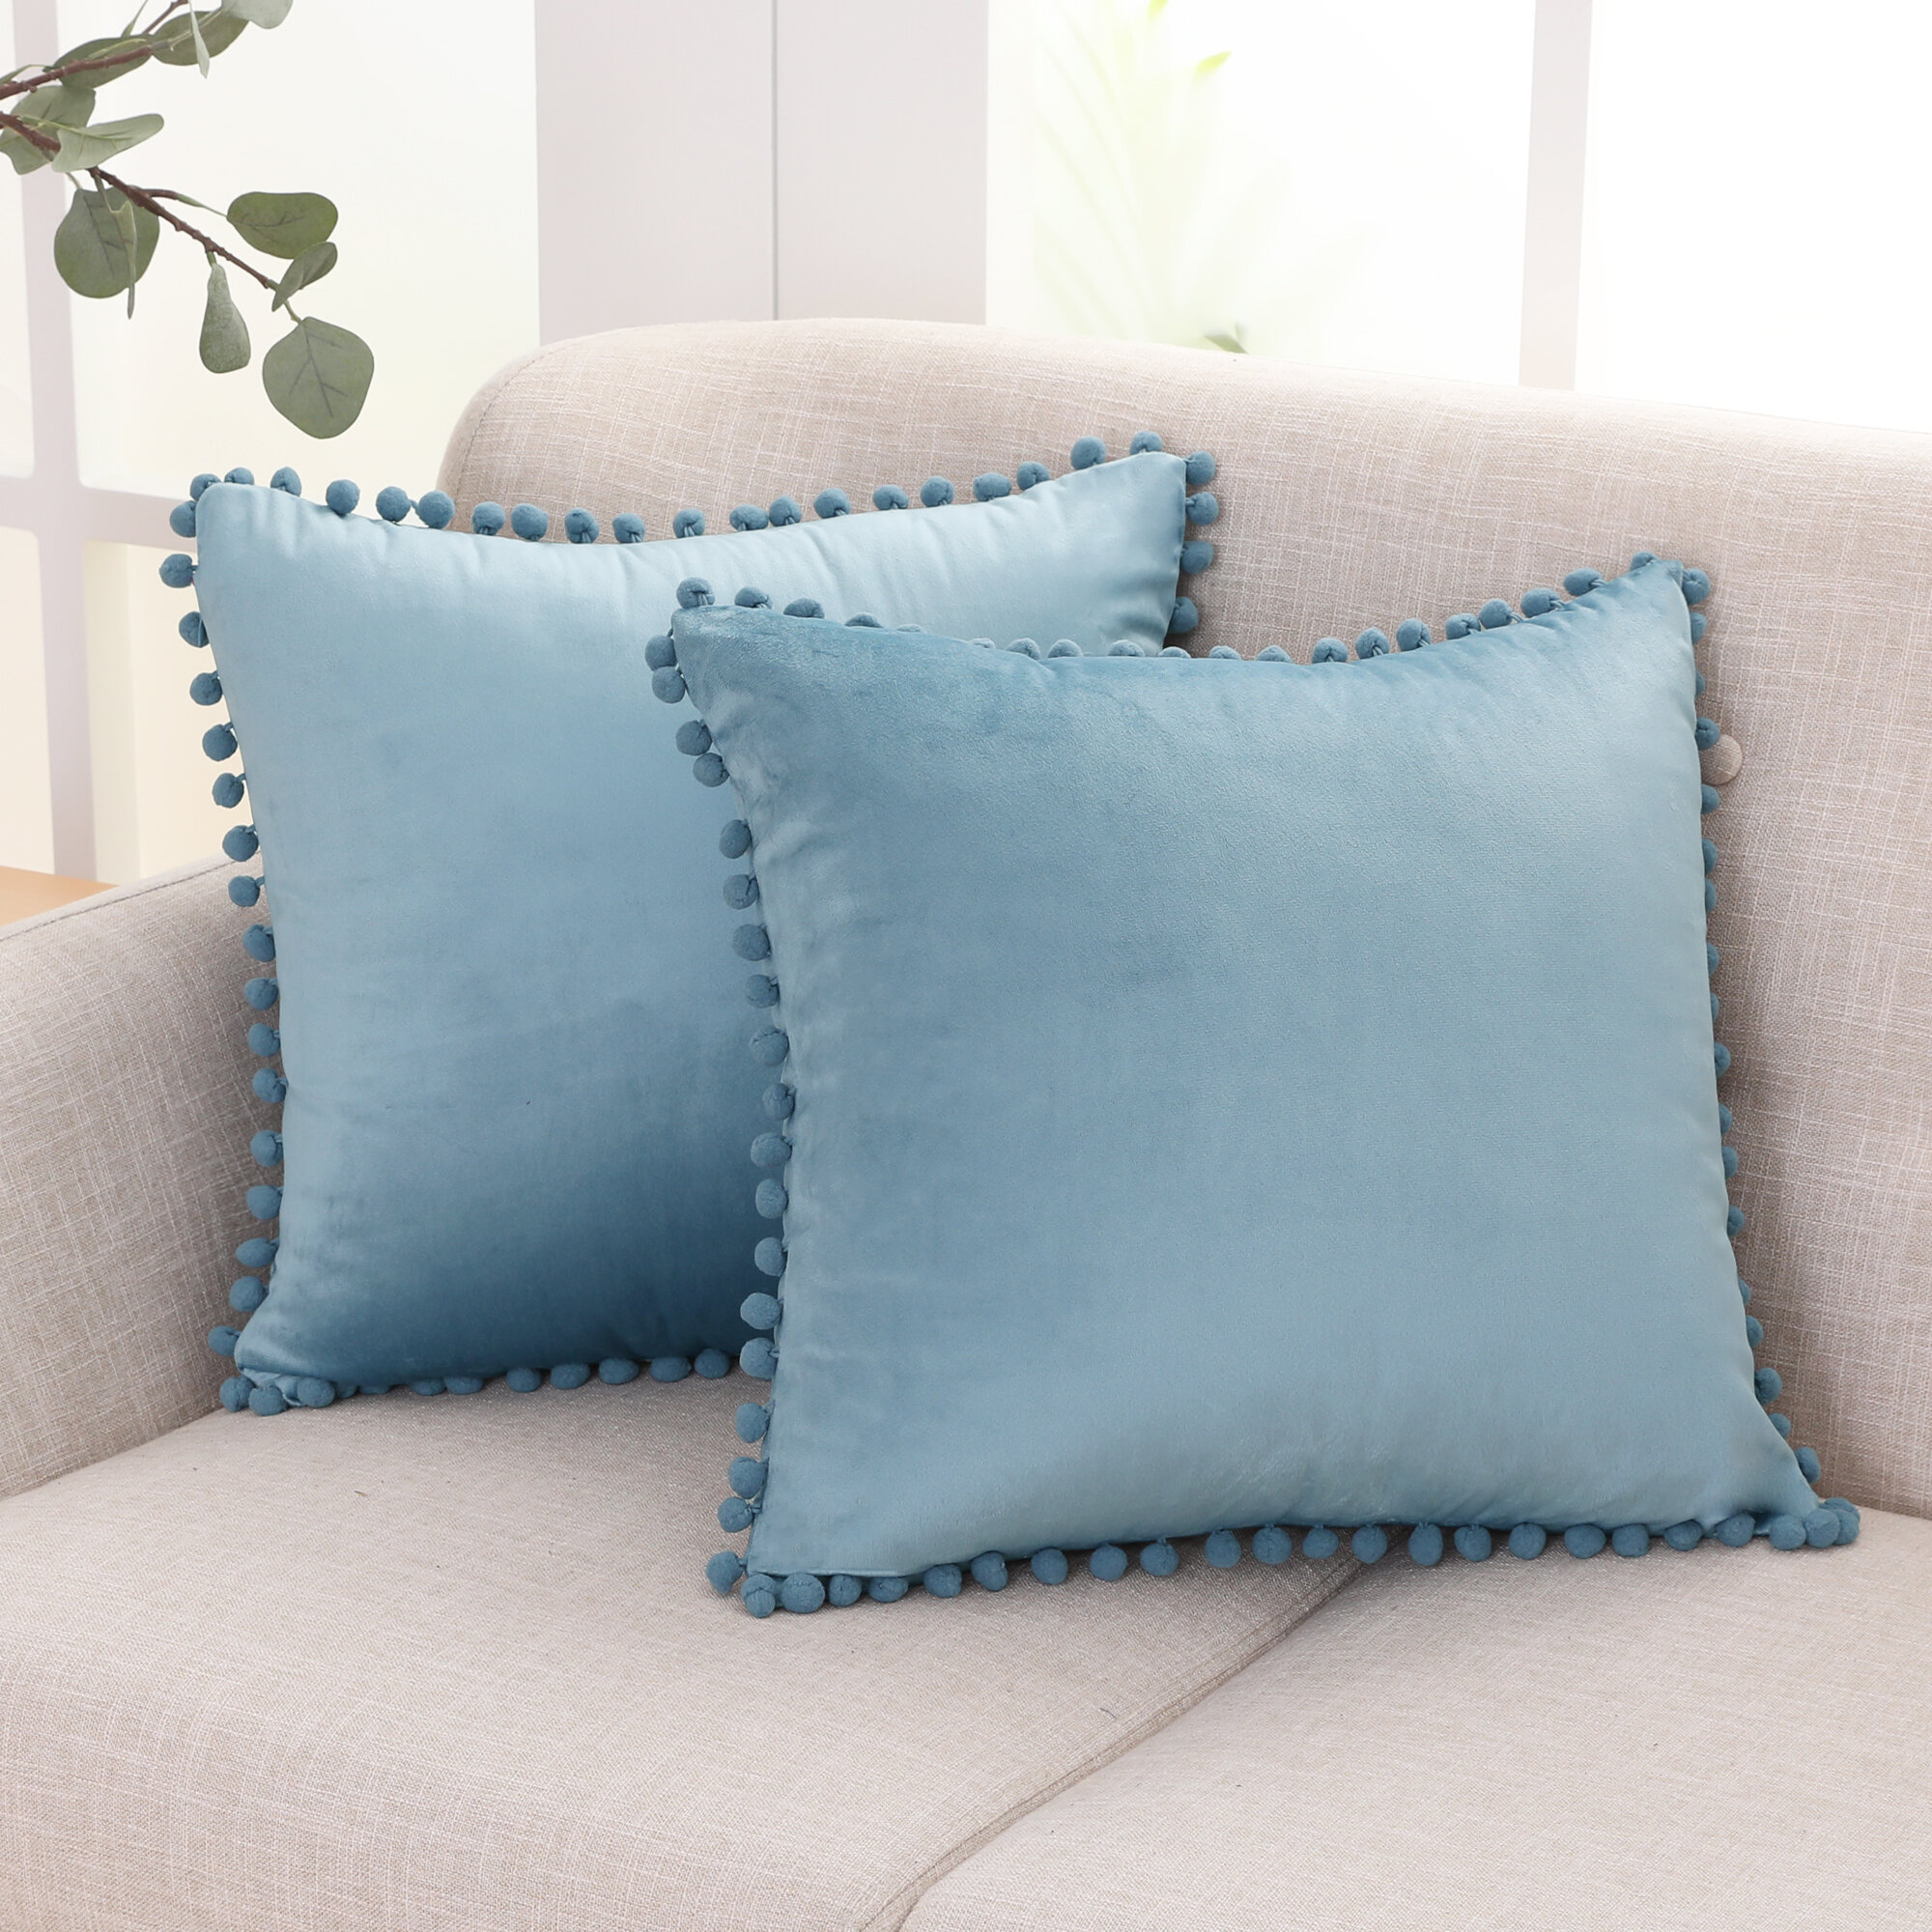 Comvi Blue Throw Pillows with Inserts Included - Decorative Pillows,  Inserts & Covers - (2 Throw Pillows + 2 Pillow Covers) - Velvet Throw  Pillows for